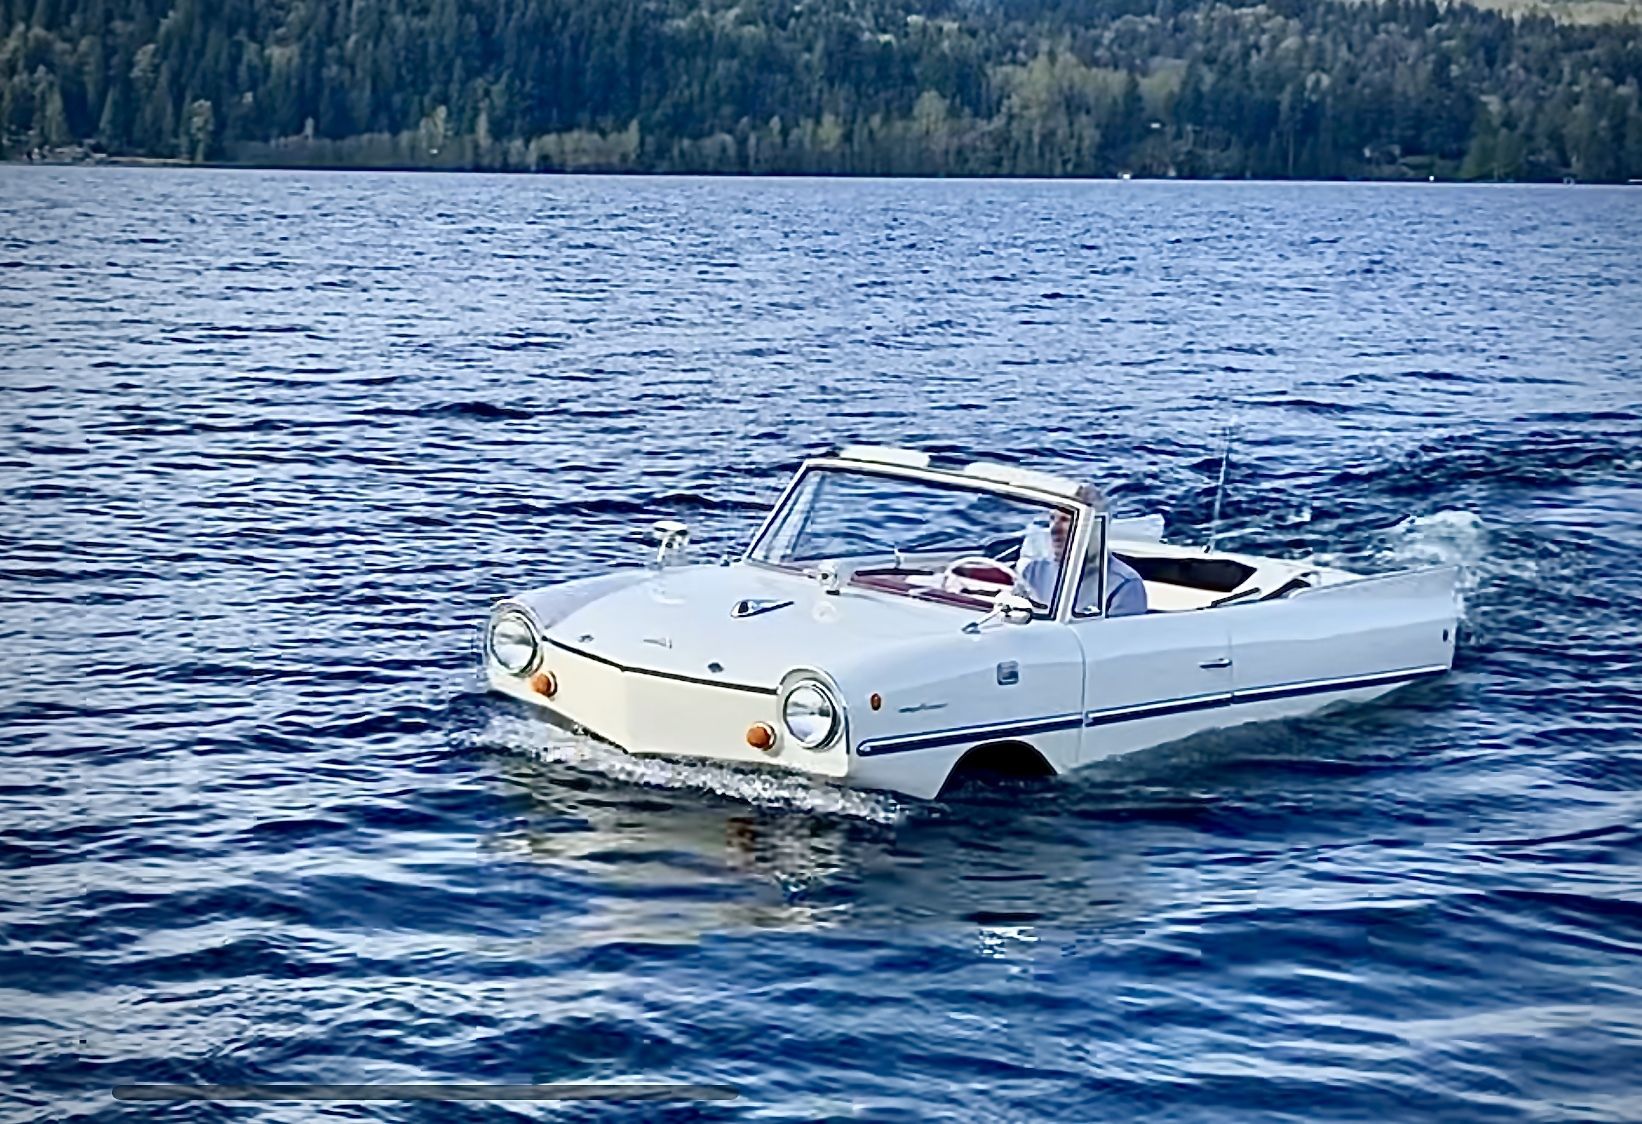 Top 10 Amphibious Cars You Didn't Know About